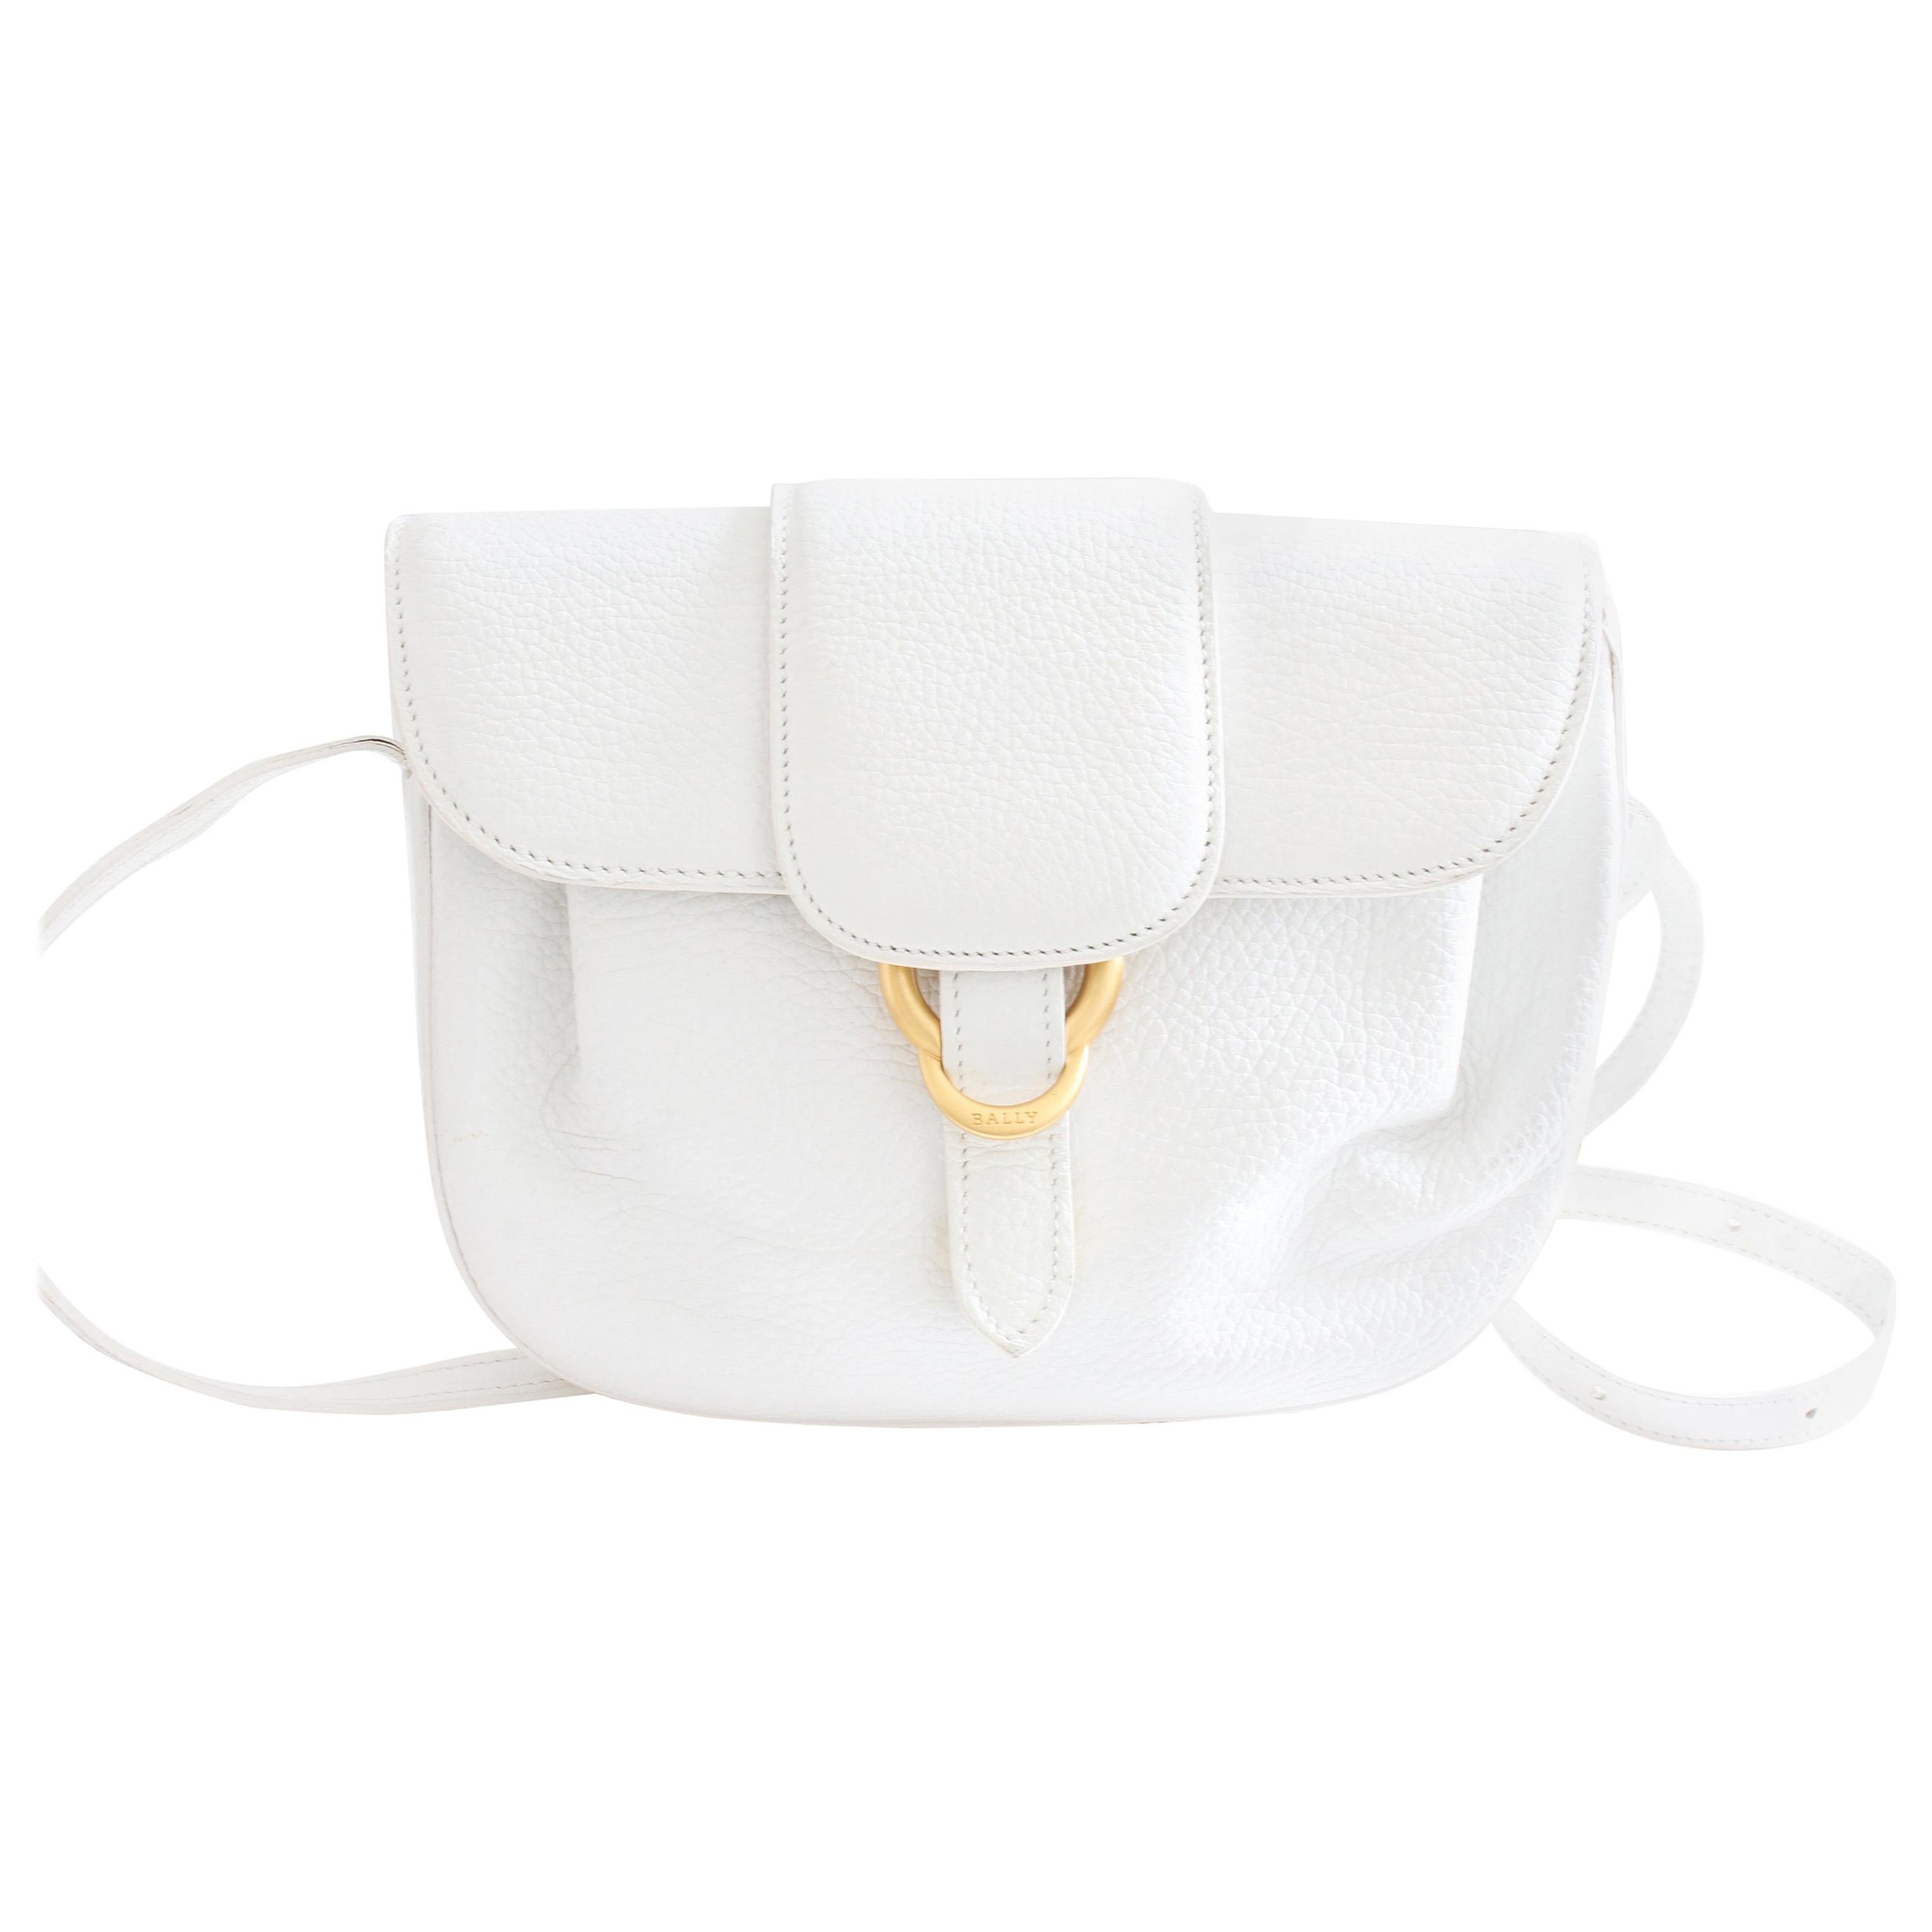 Bally Crossbody Bag White Pebbled Leather Top Flap Shoulder Bag Italy Vintage For Sale